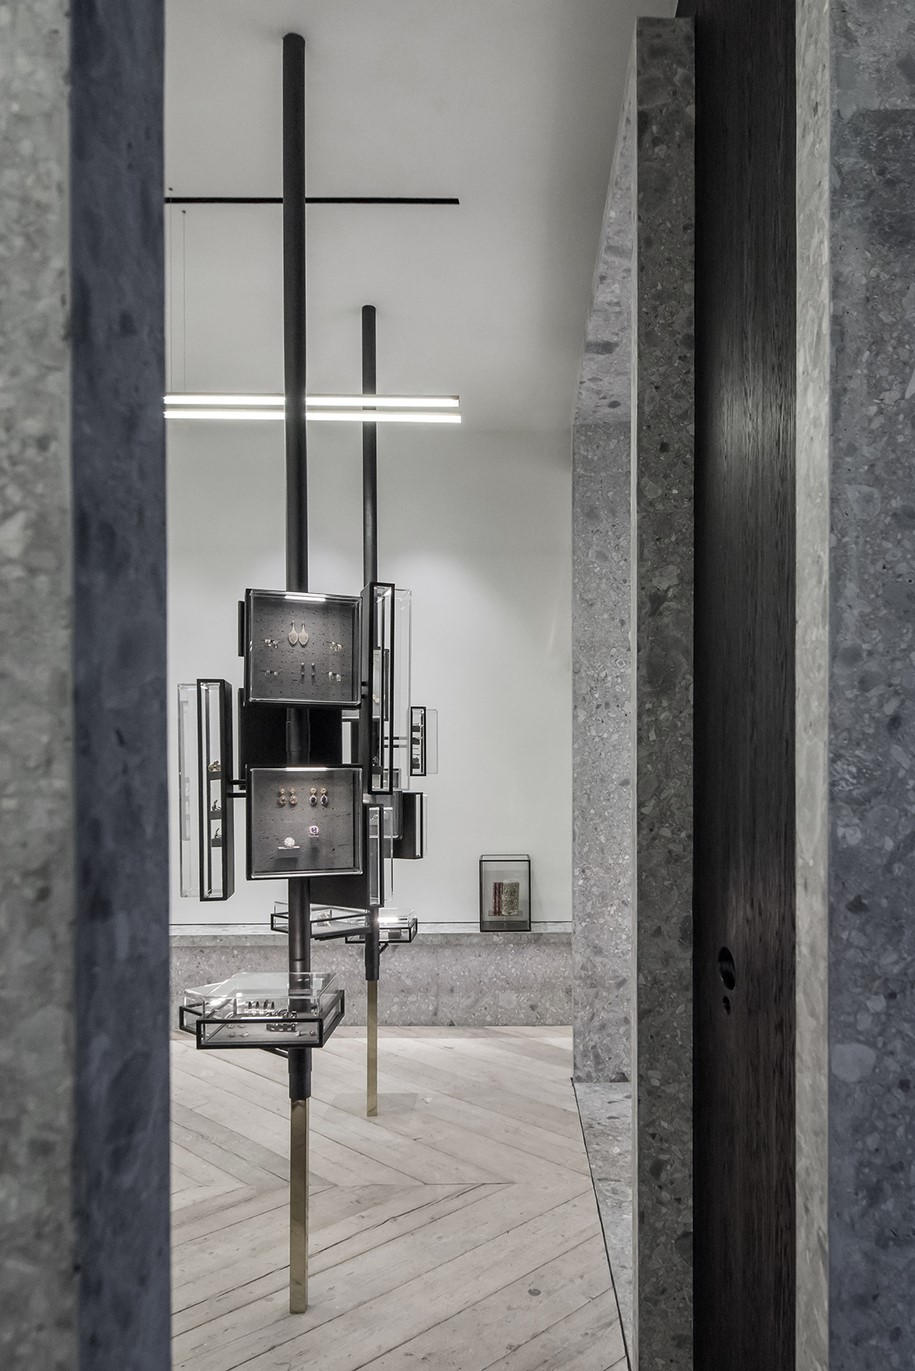 Archisearch Kois Associated Architects Composed an Unexpected Store for Ileana Makri Jewellery